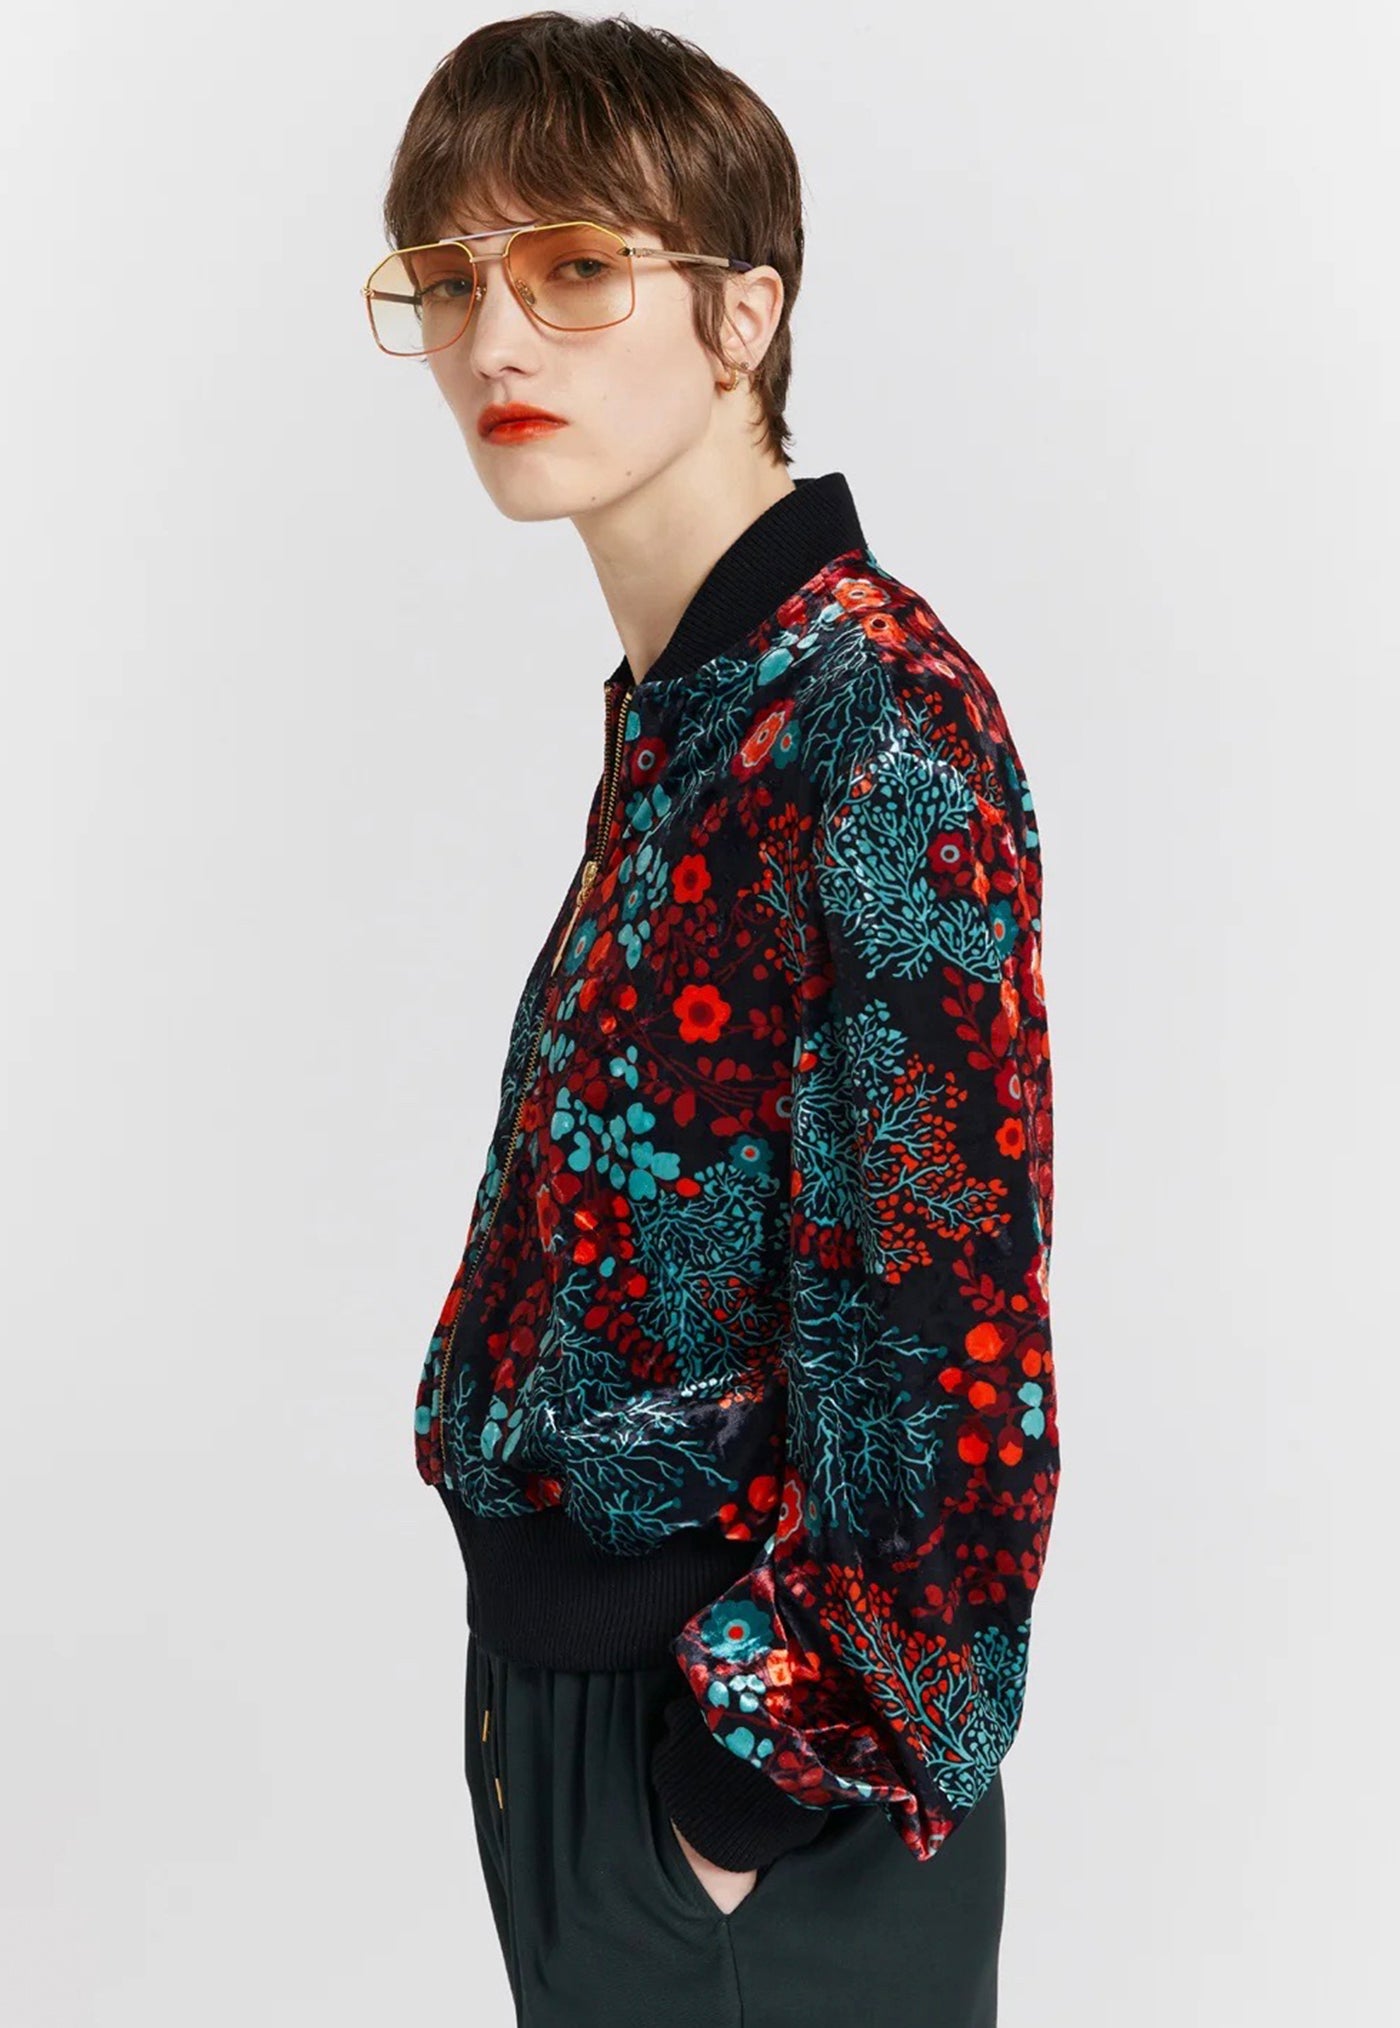 Electric Velvet Bomber Jacket - Electric Meadow sold by Angel Divine